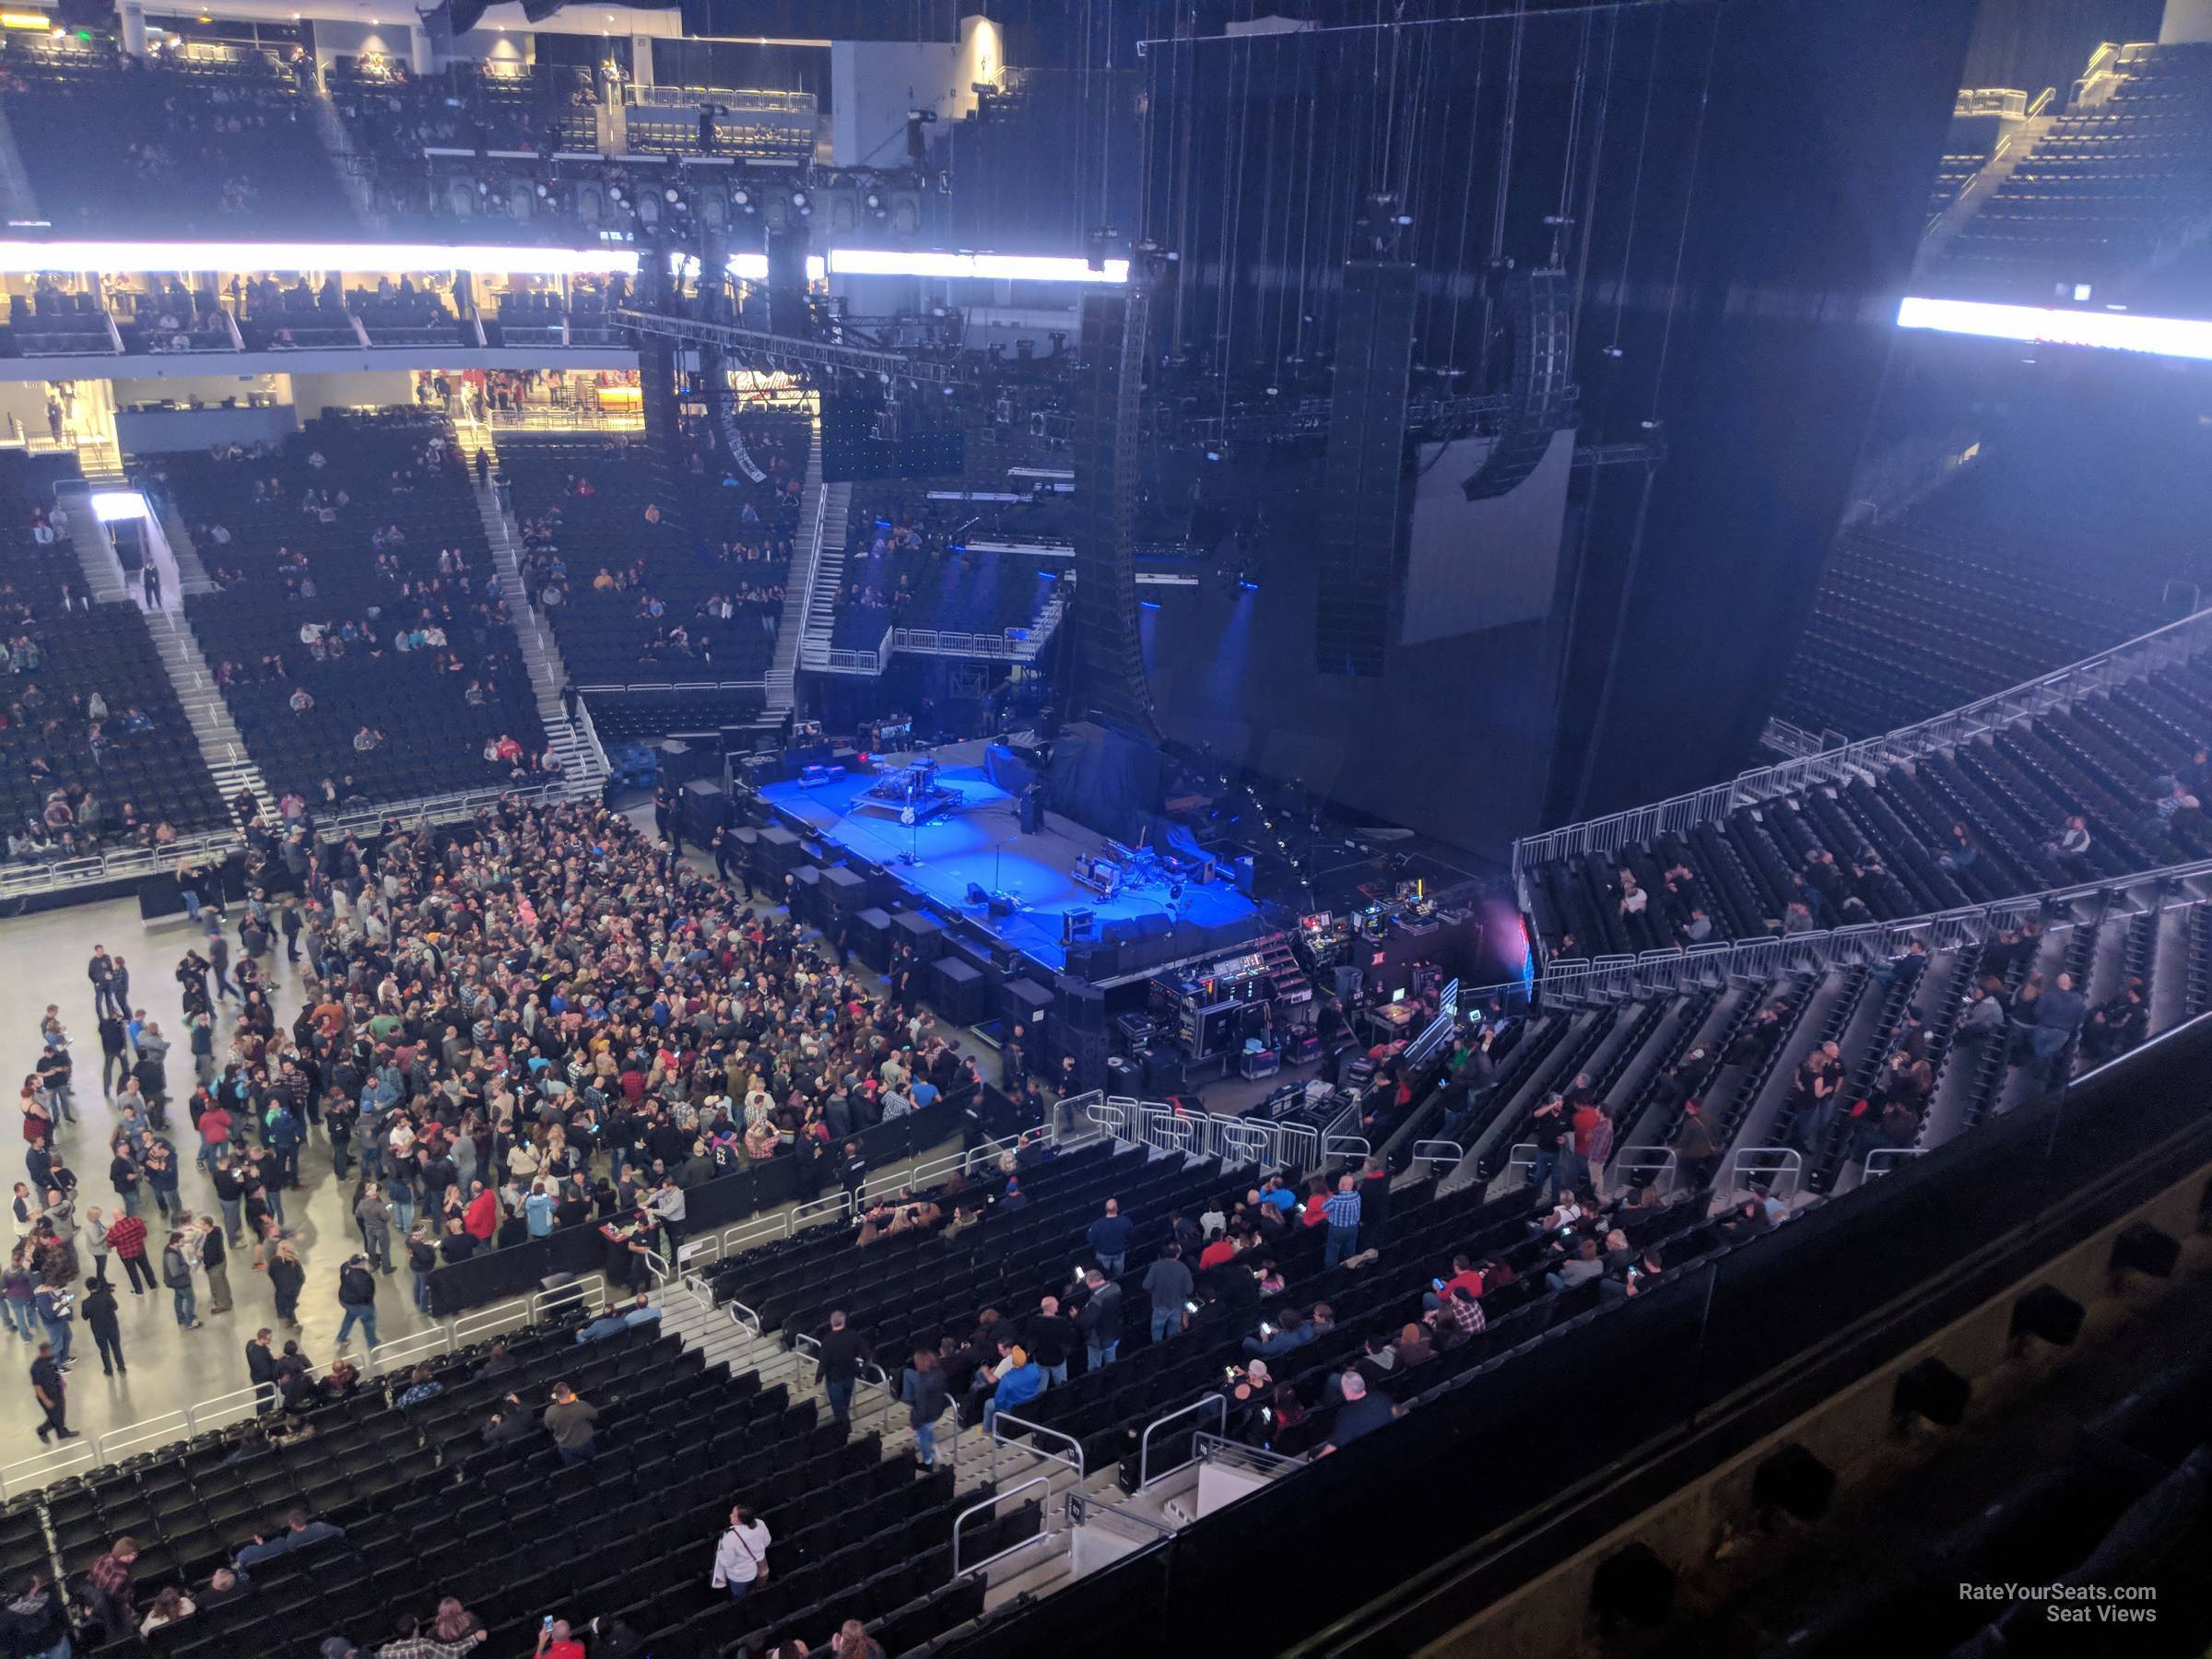 section 222, row 3 seat view  for concert - fiserv forum